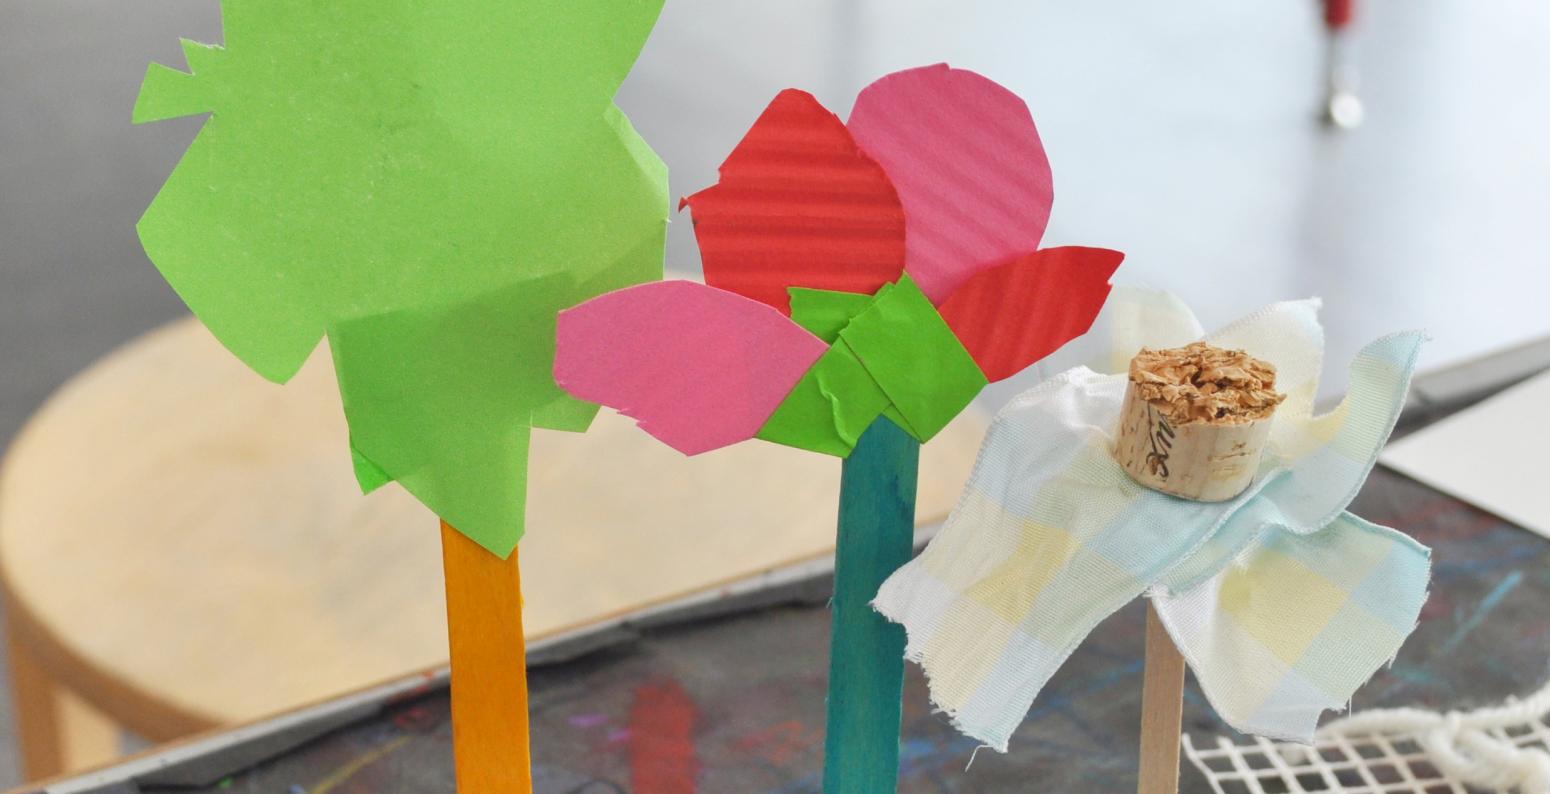 Three flower sculptures made from found materials including papers, corks, ribbons, and popsicle sticks.